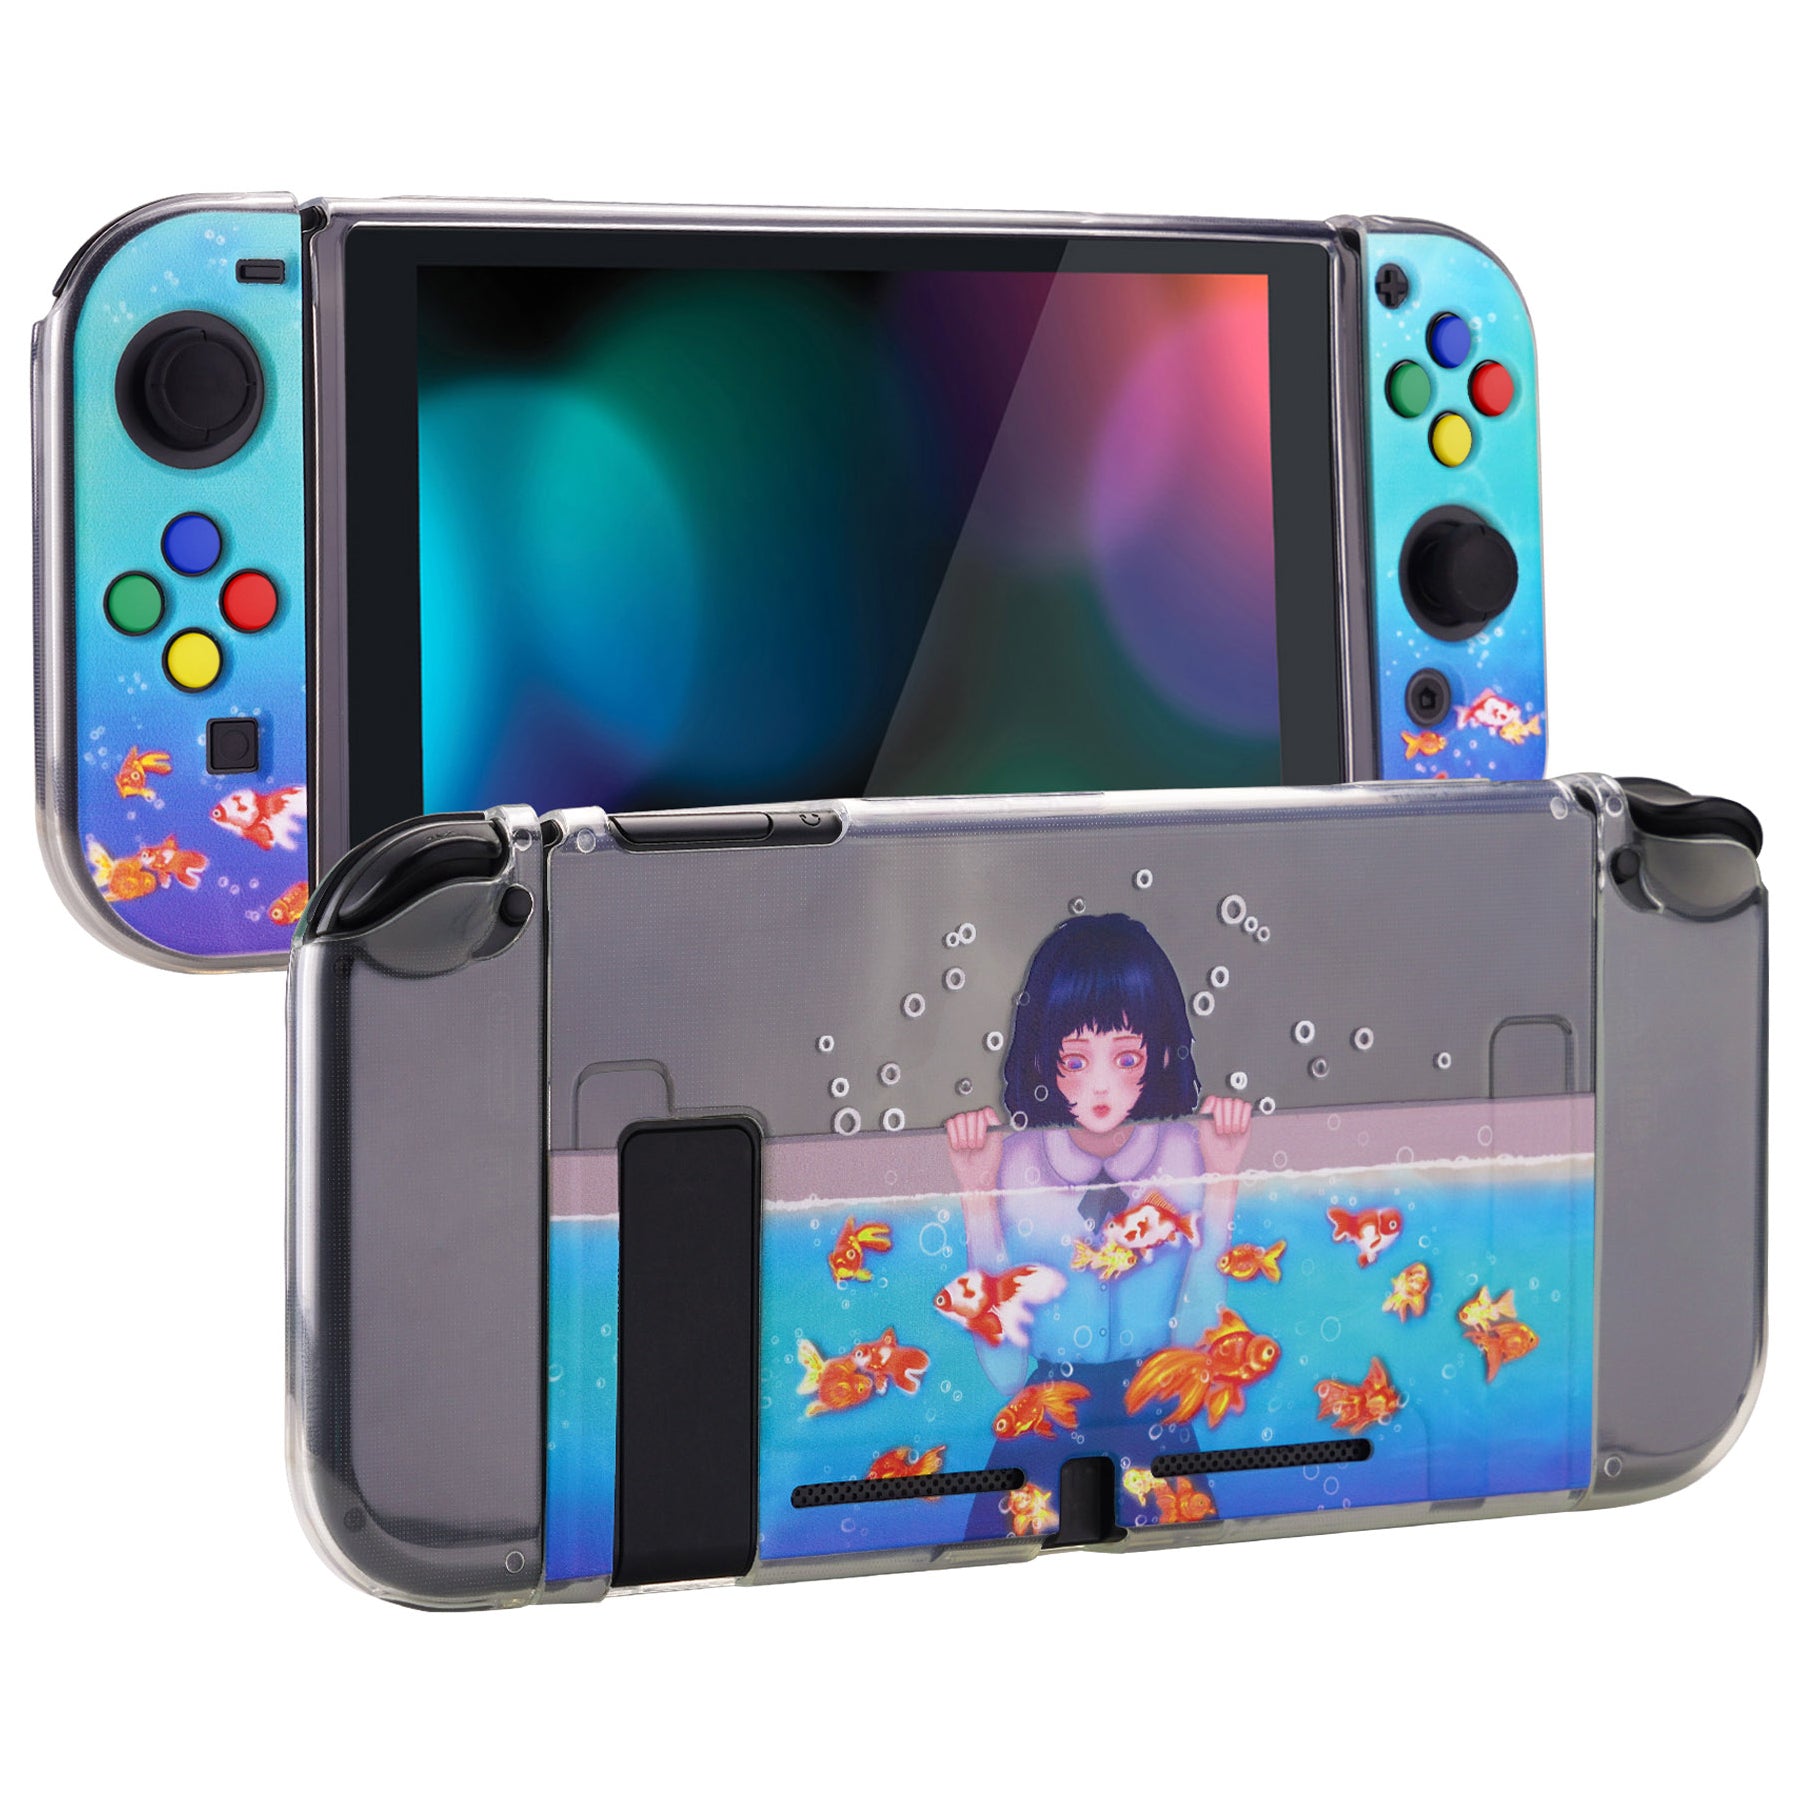 PlayVital Transparent Protective Case for NS Switch, Soft TPU Slim Case Cover for NS Switch Joycon Console with ColorfulABXY Direction Button Caps - Aquarium Girl - NTU6029 PlayVital